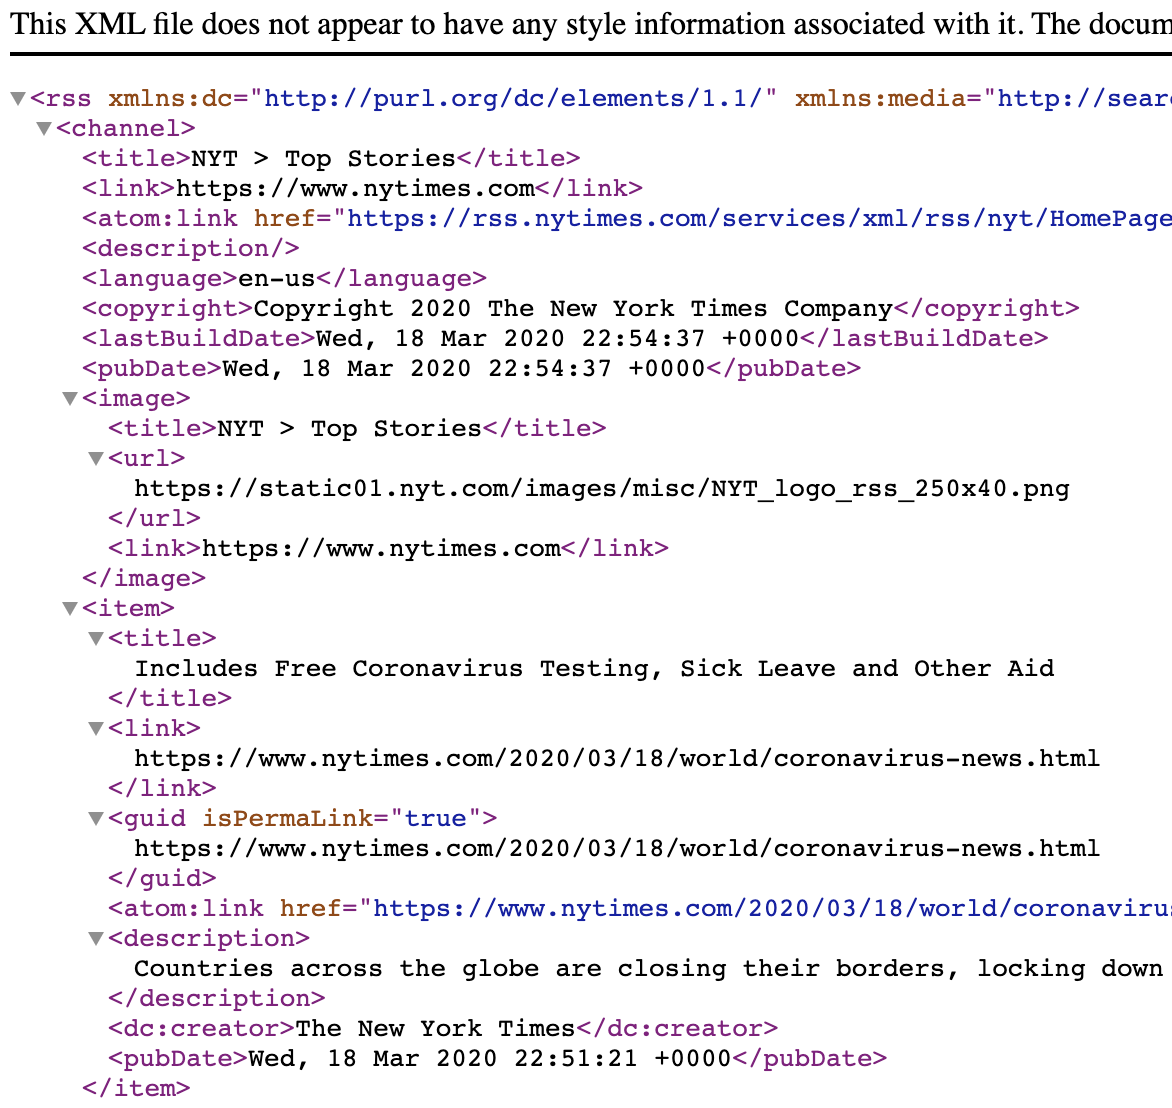 Finding contents via RSS feeds on Newsy